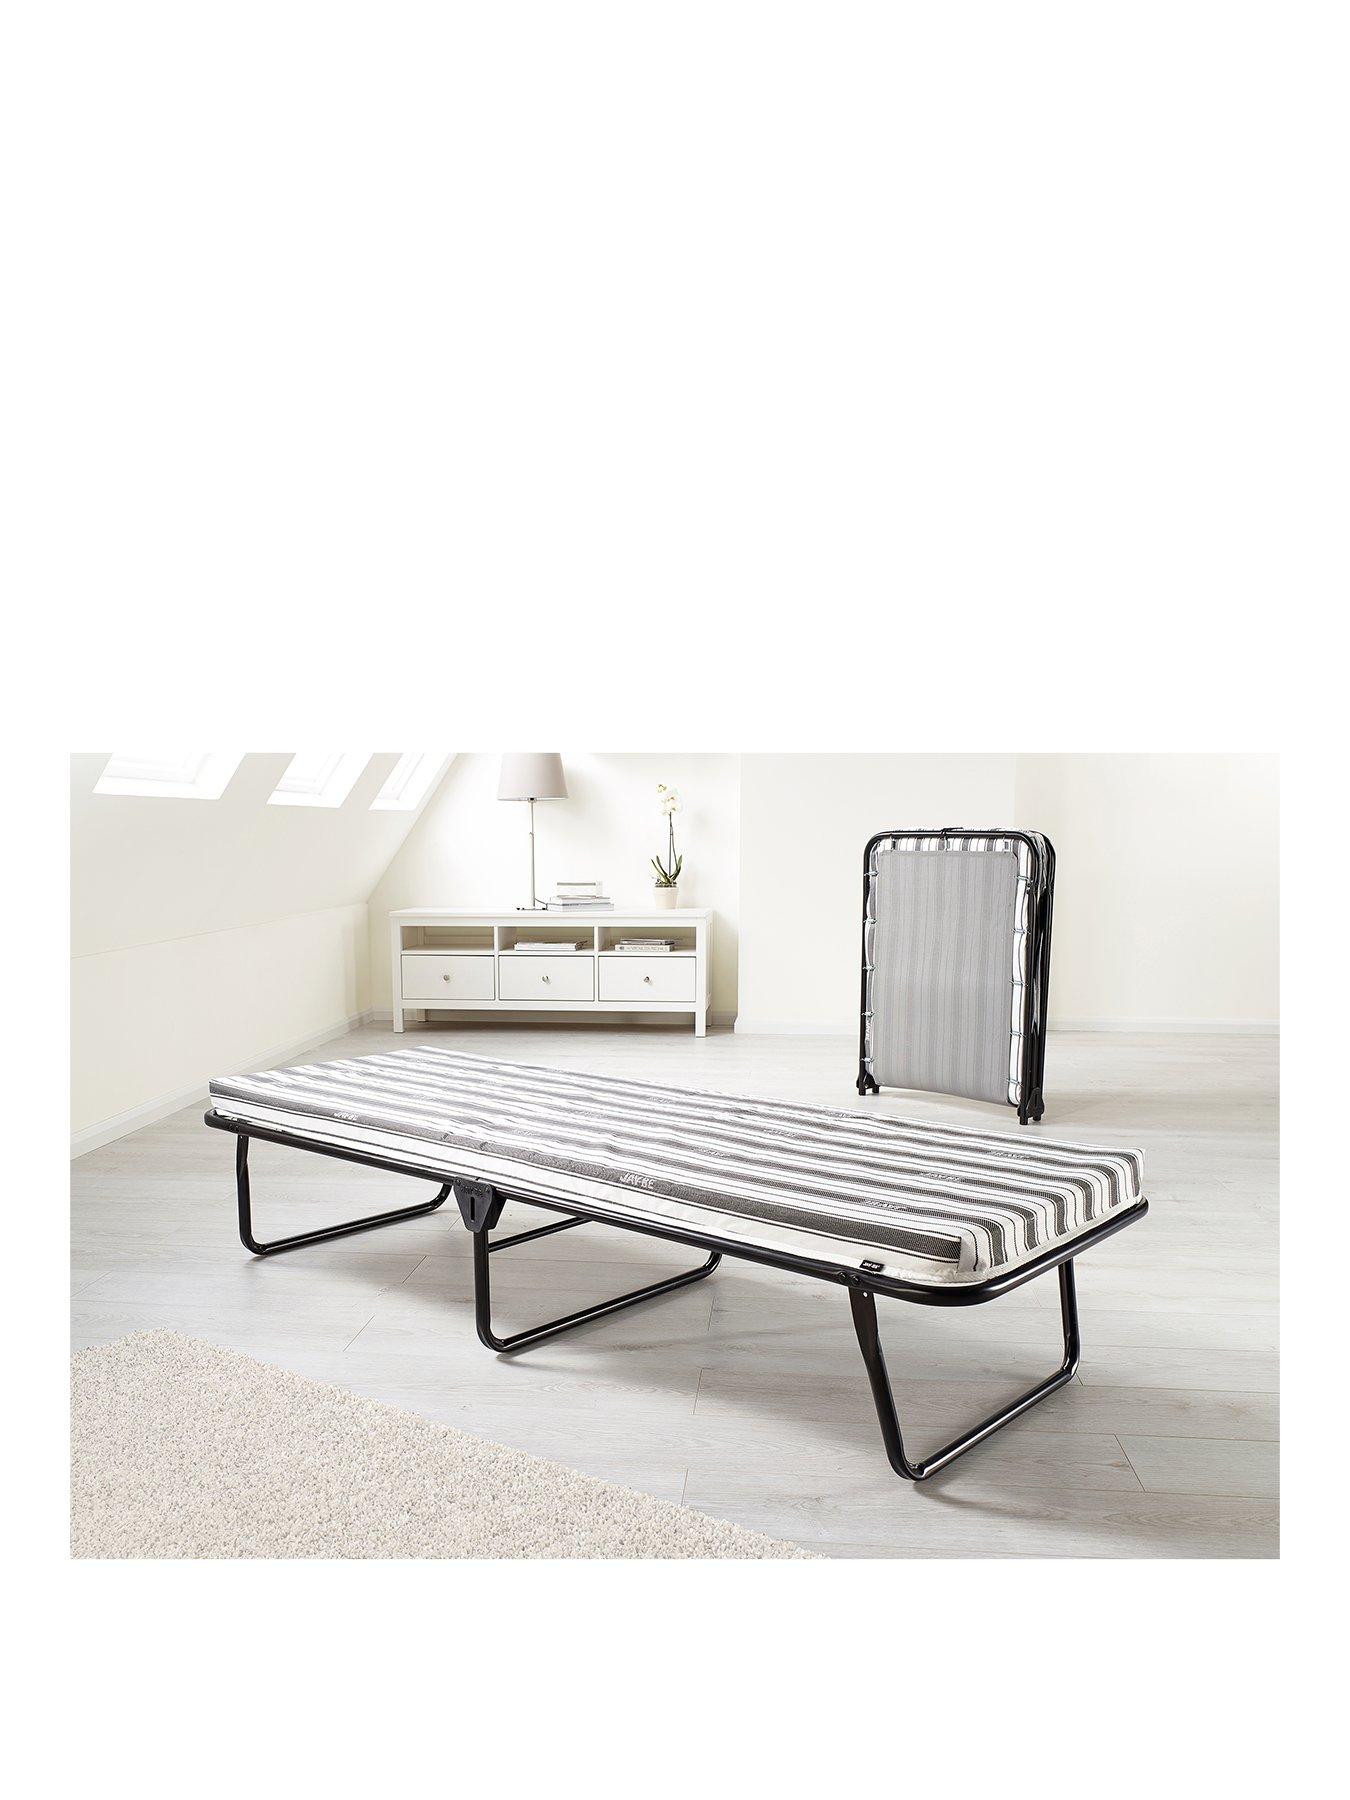 Jaybe Value Folding Bed With Rebound E-Fibre Mattress - Available In Single And Small Double Sizes - Small Double